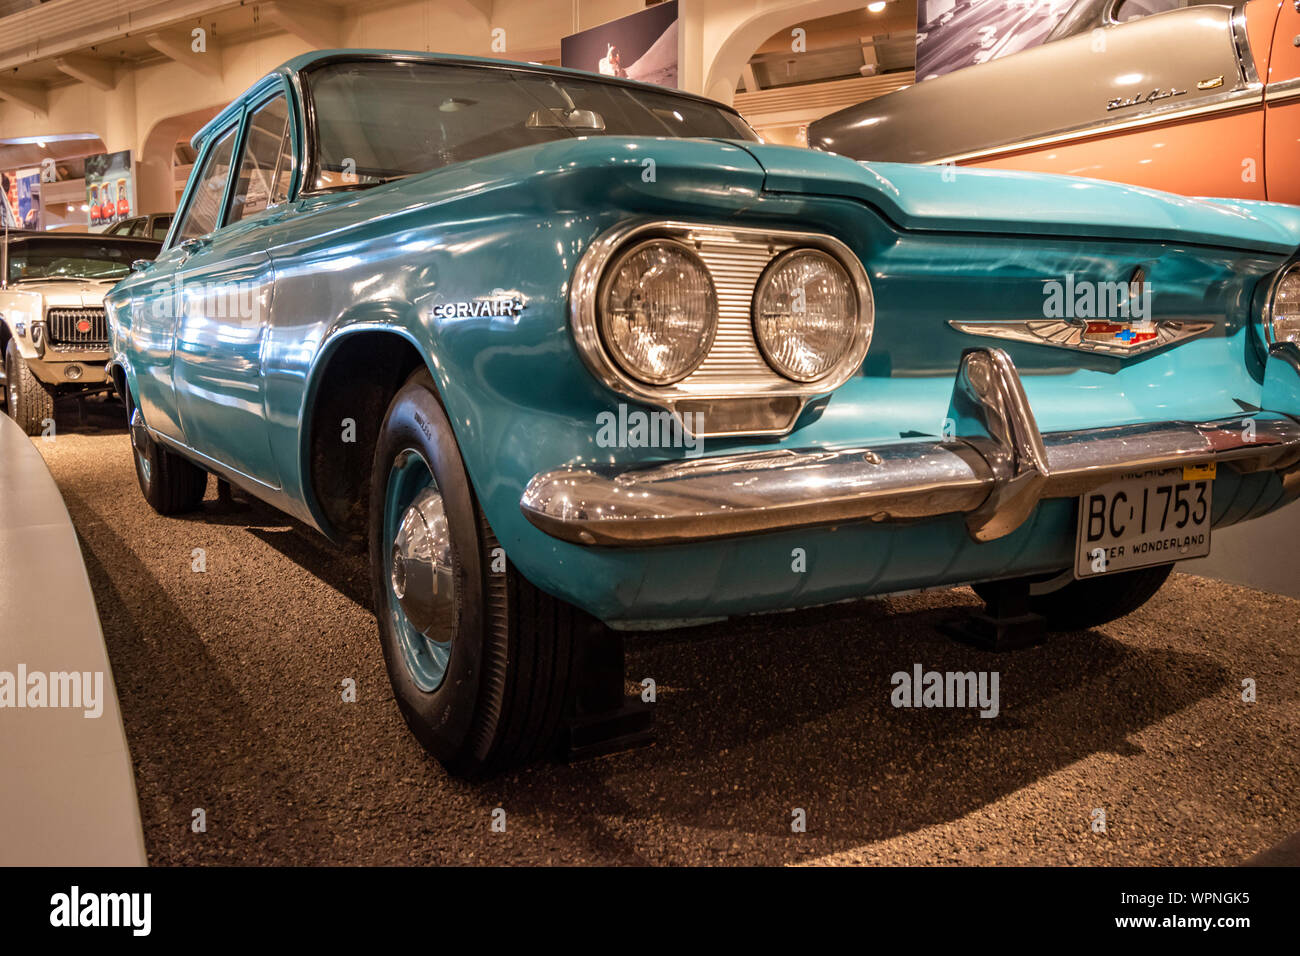 Dearborn, Mi, Usa - March 2019: The 1960 Chevrolet Corvair sedan presented in the Henry Ford Museum of American Innovation. Stock Photo